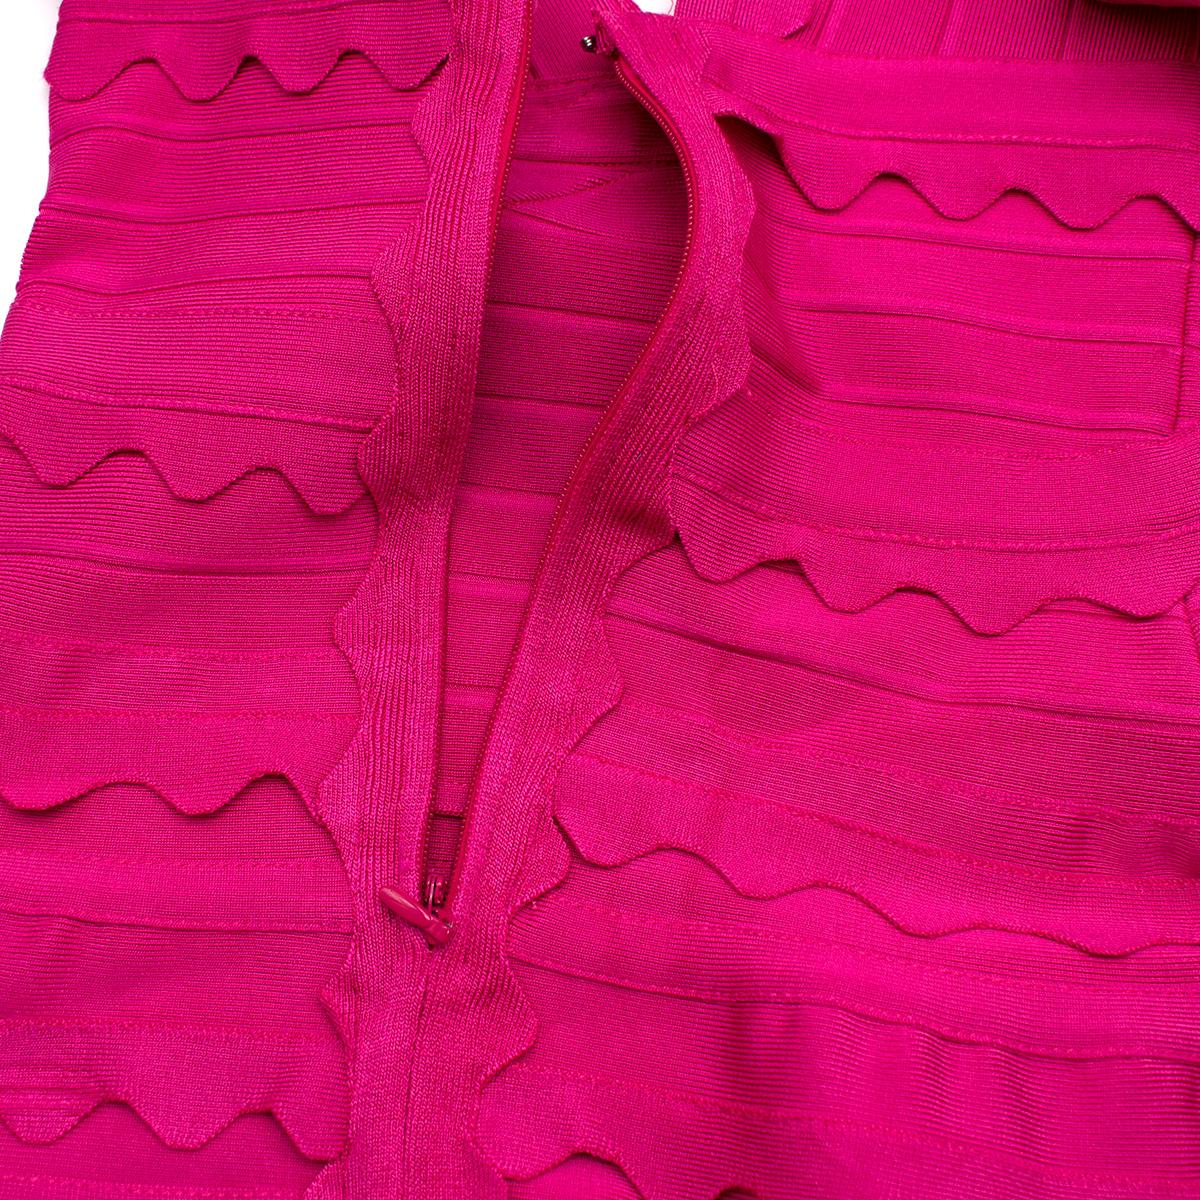 Herve Leger Nikayla Scalloped Edge Caprice Pink Dress  - Us size 6 In Excellent Condition For Sale In London, GB